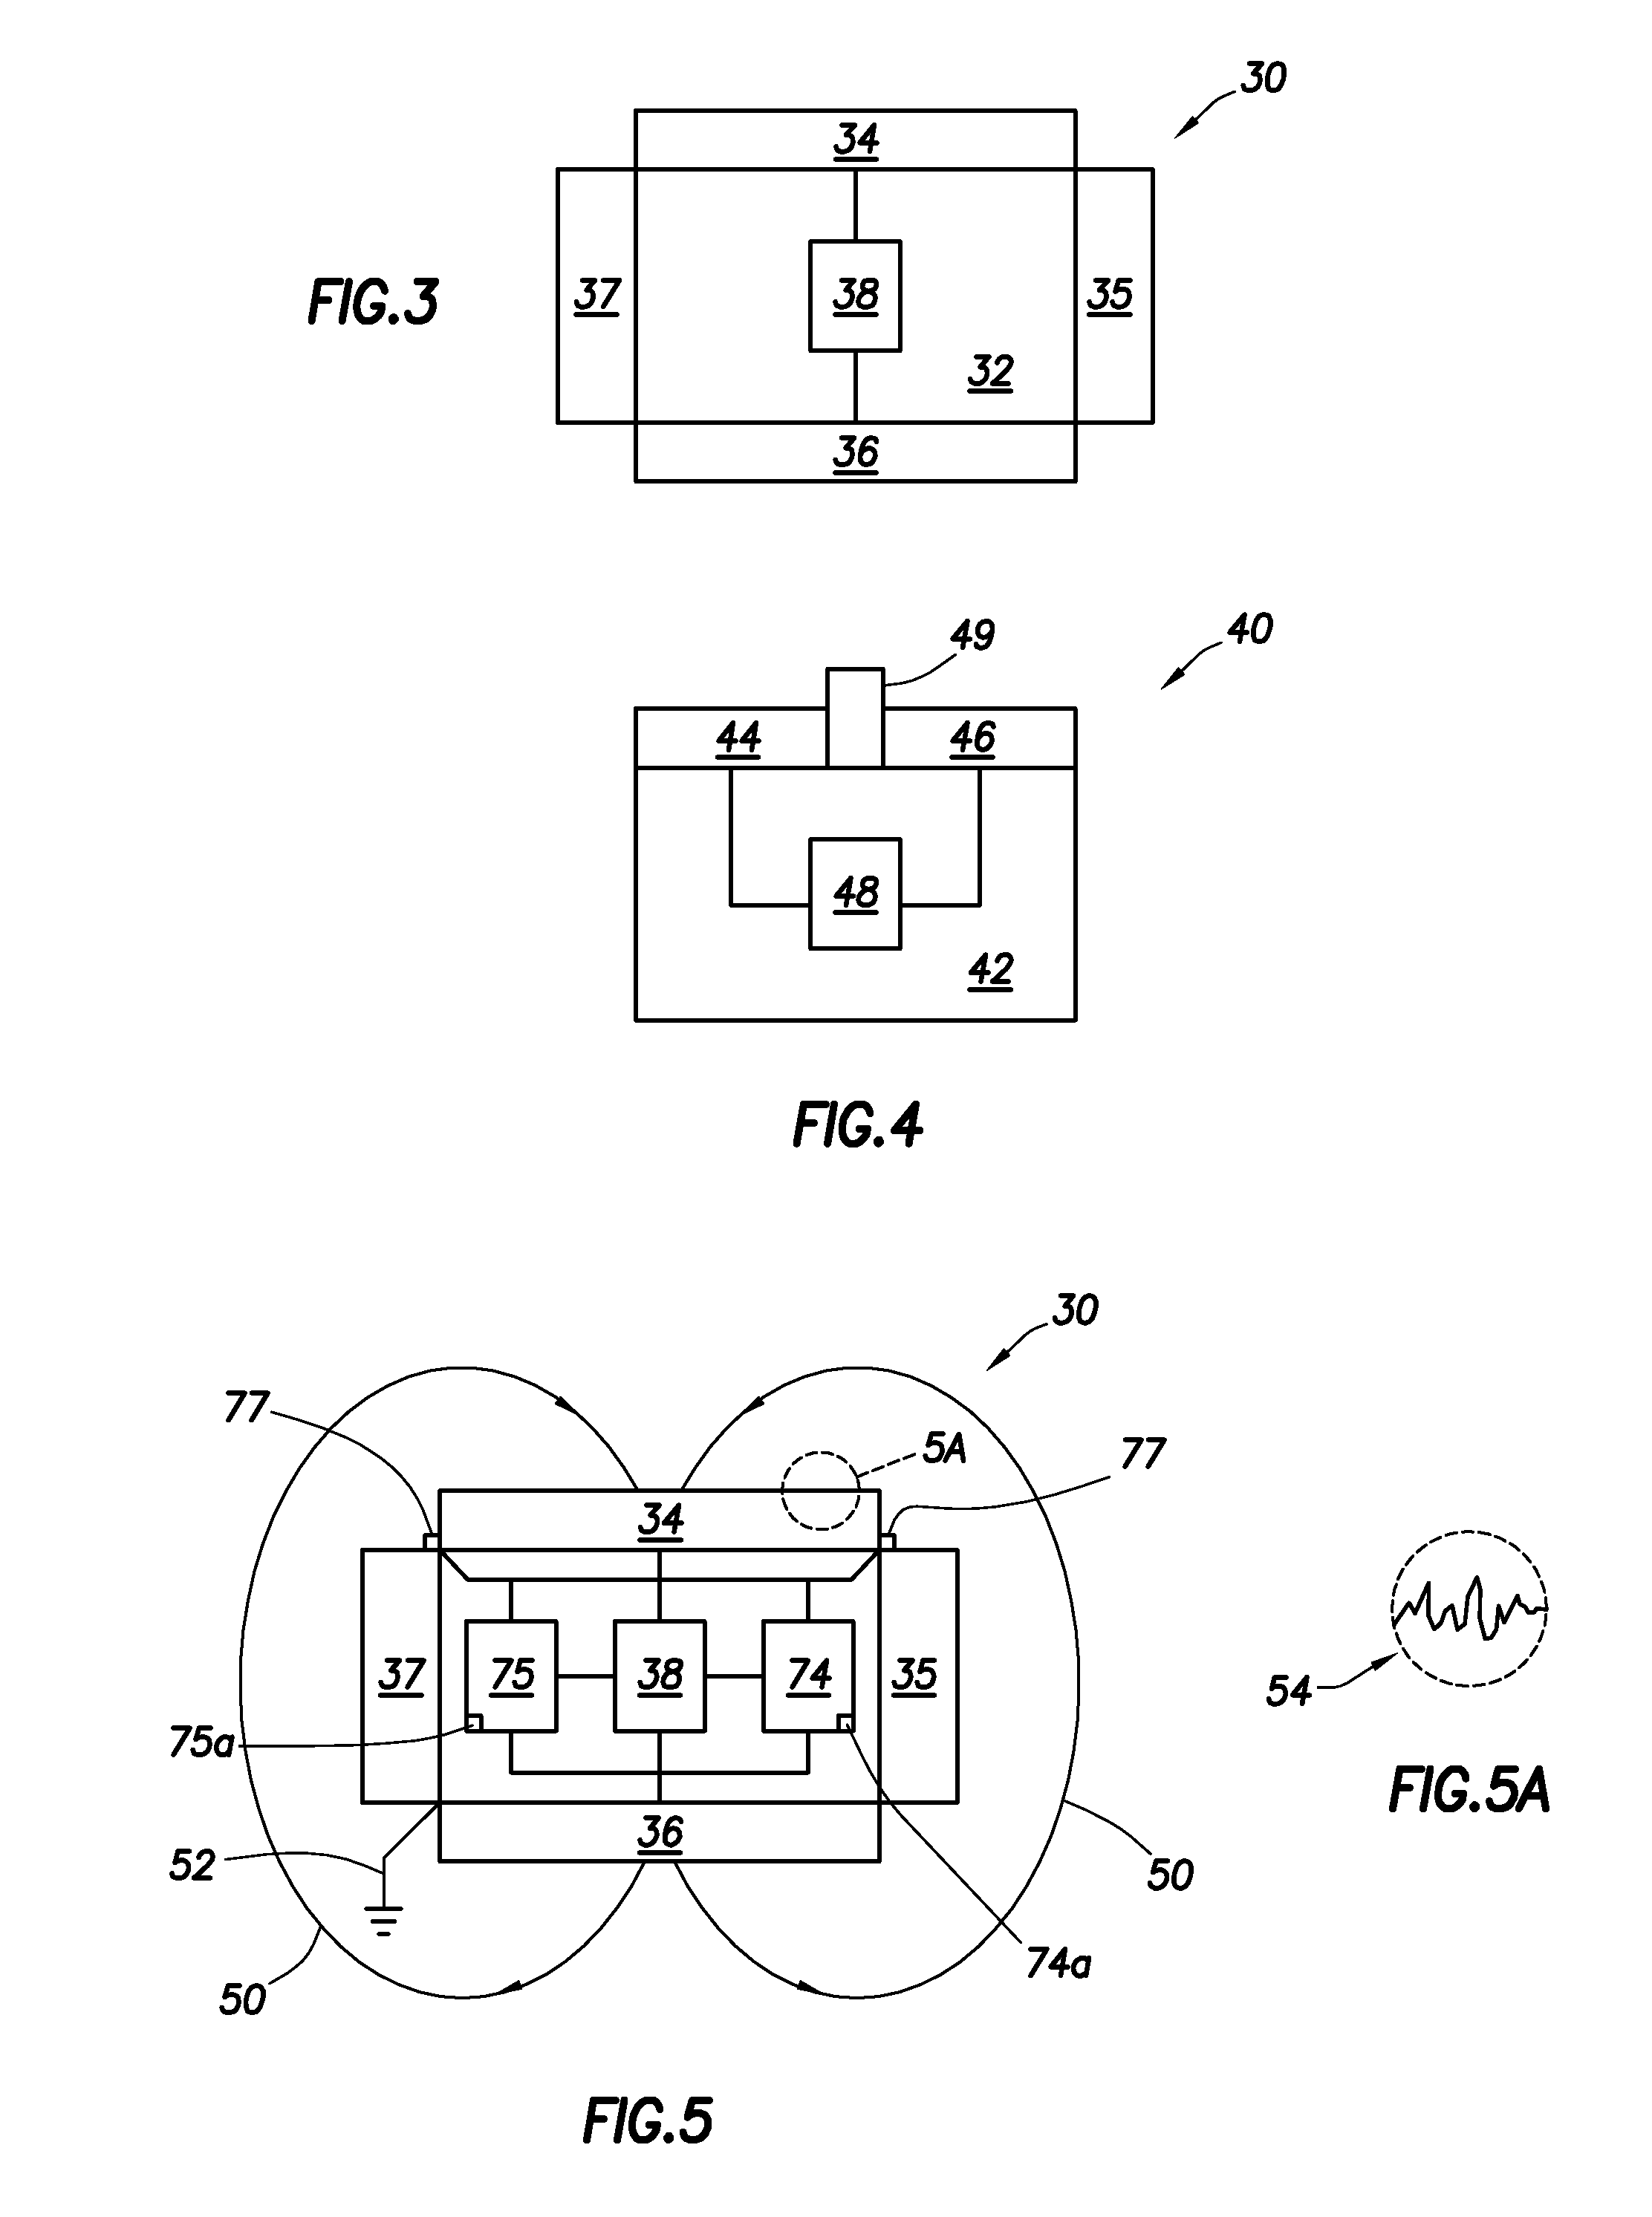 Communication System with Multiple Sources of Power